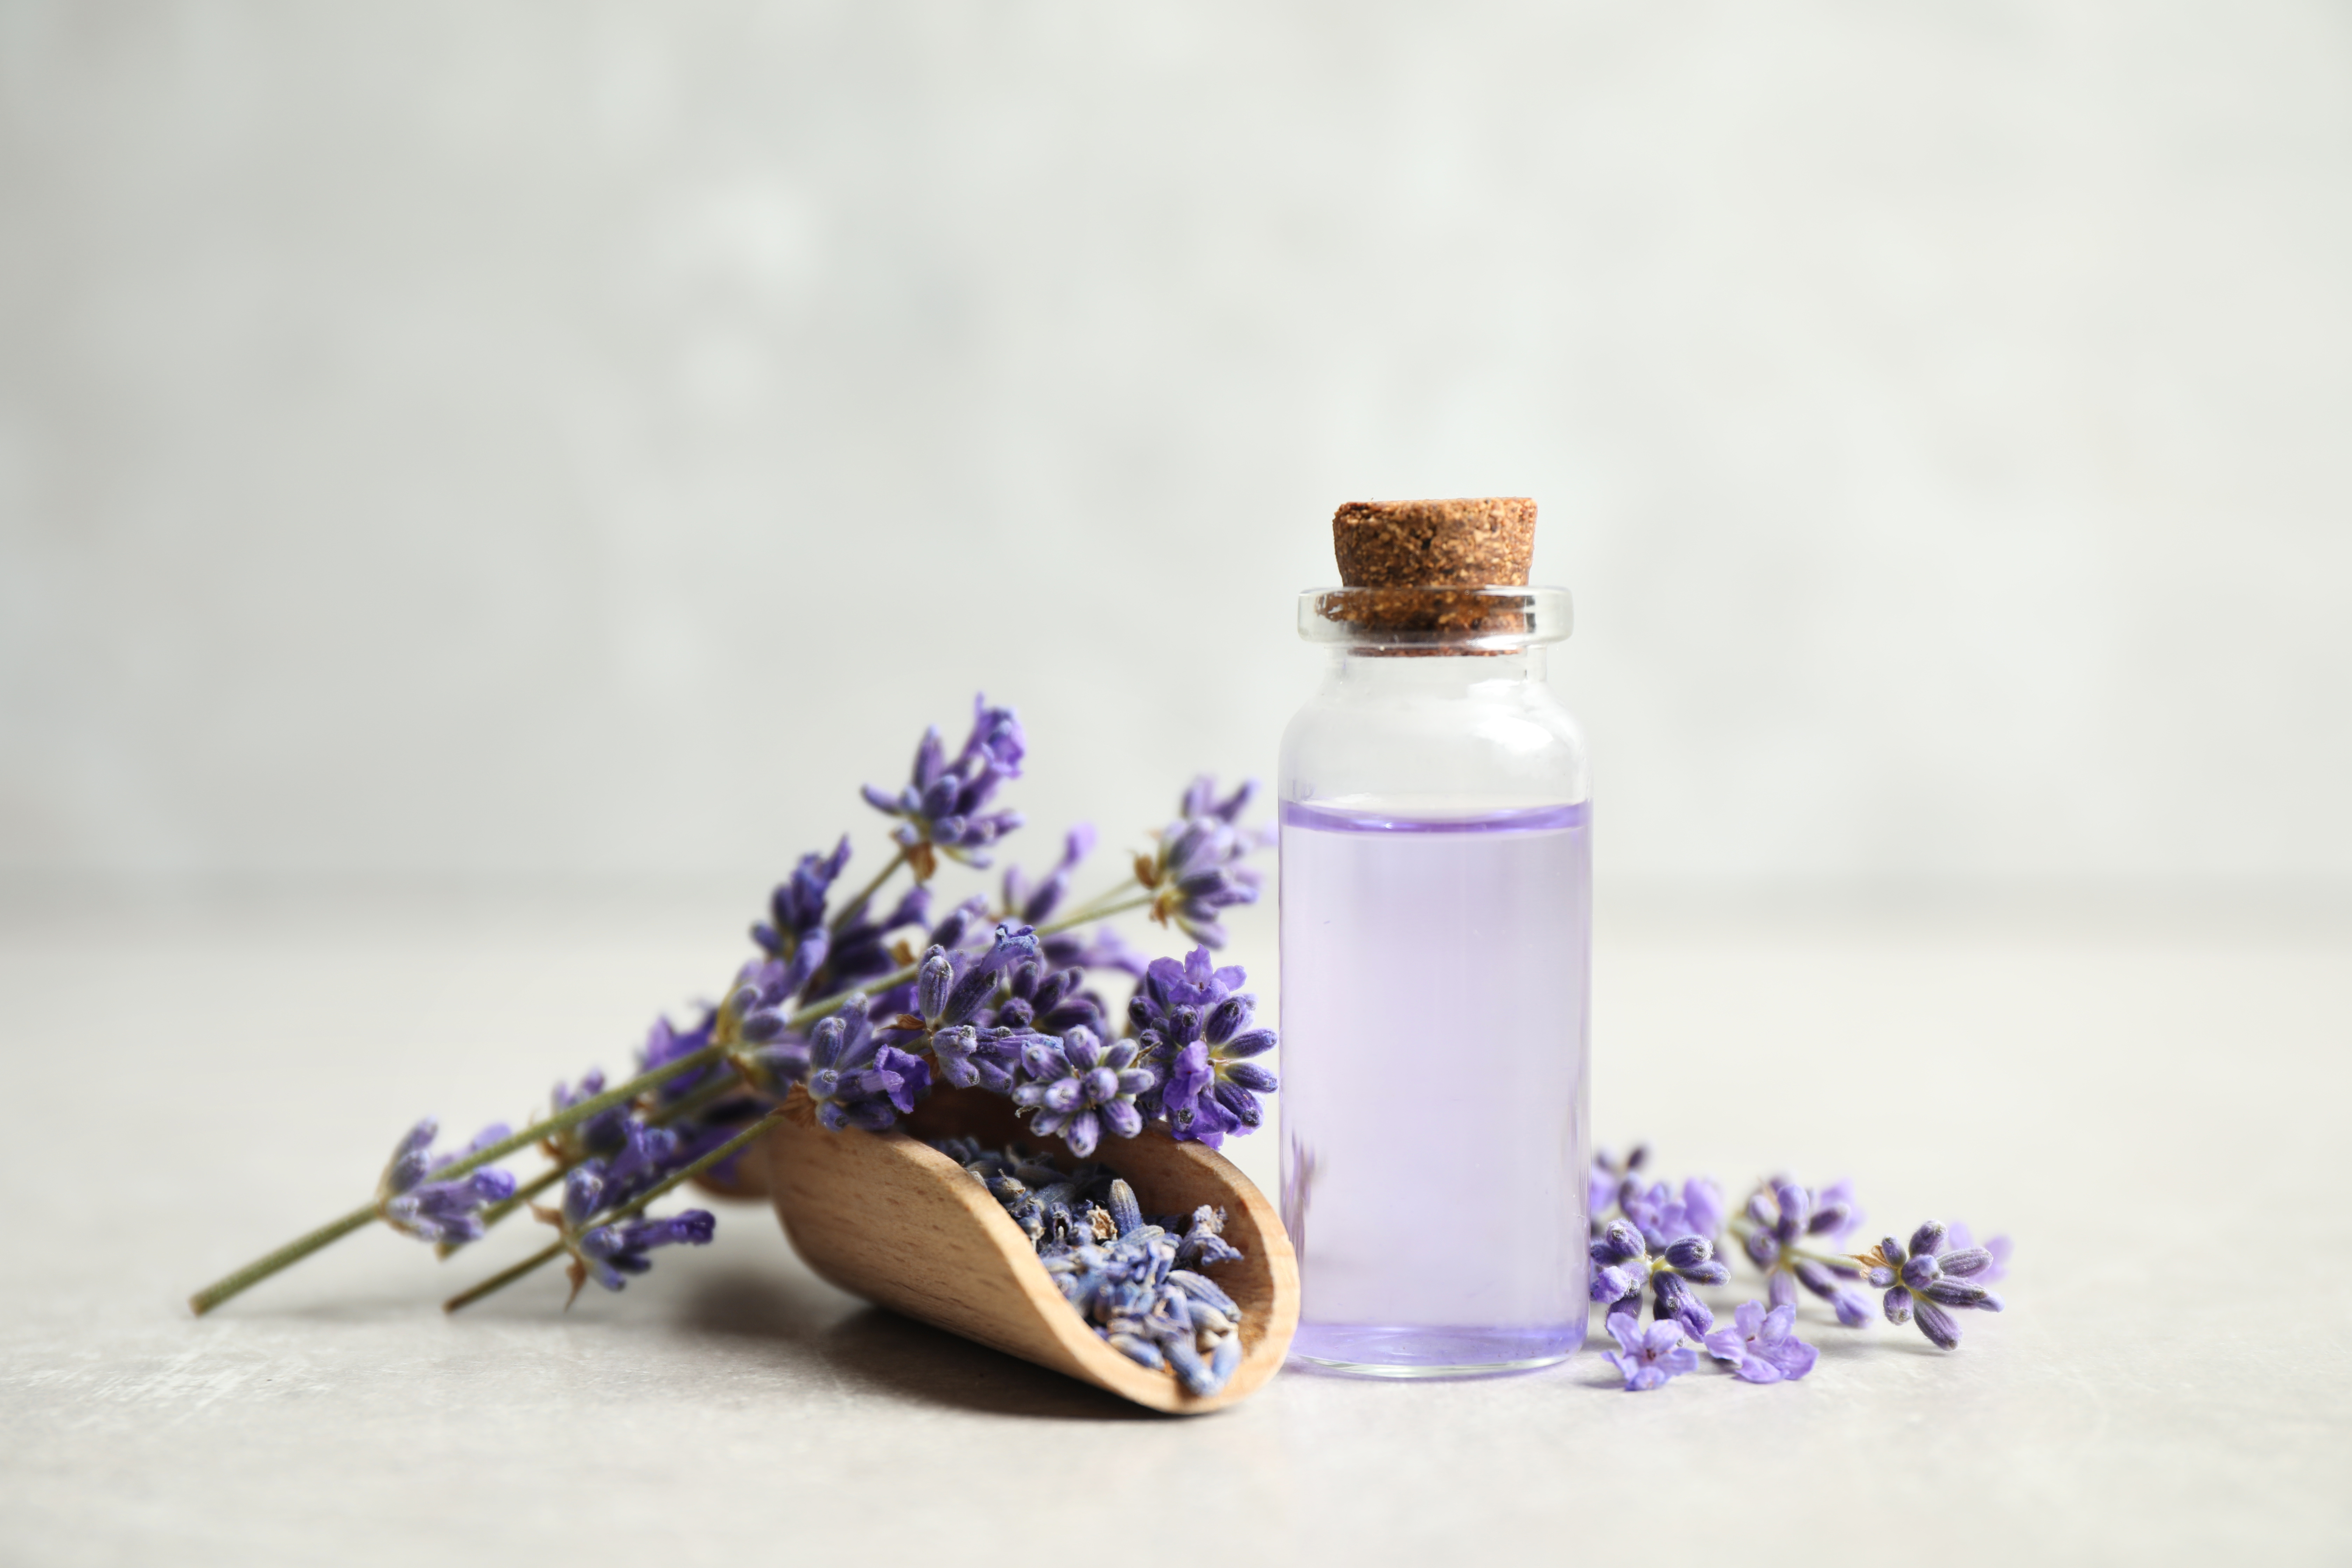 How To Treat Your Burns Using Lavender Oil